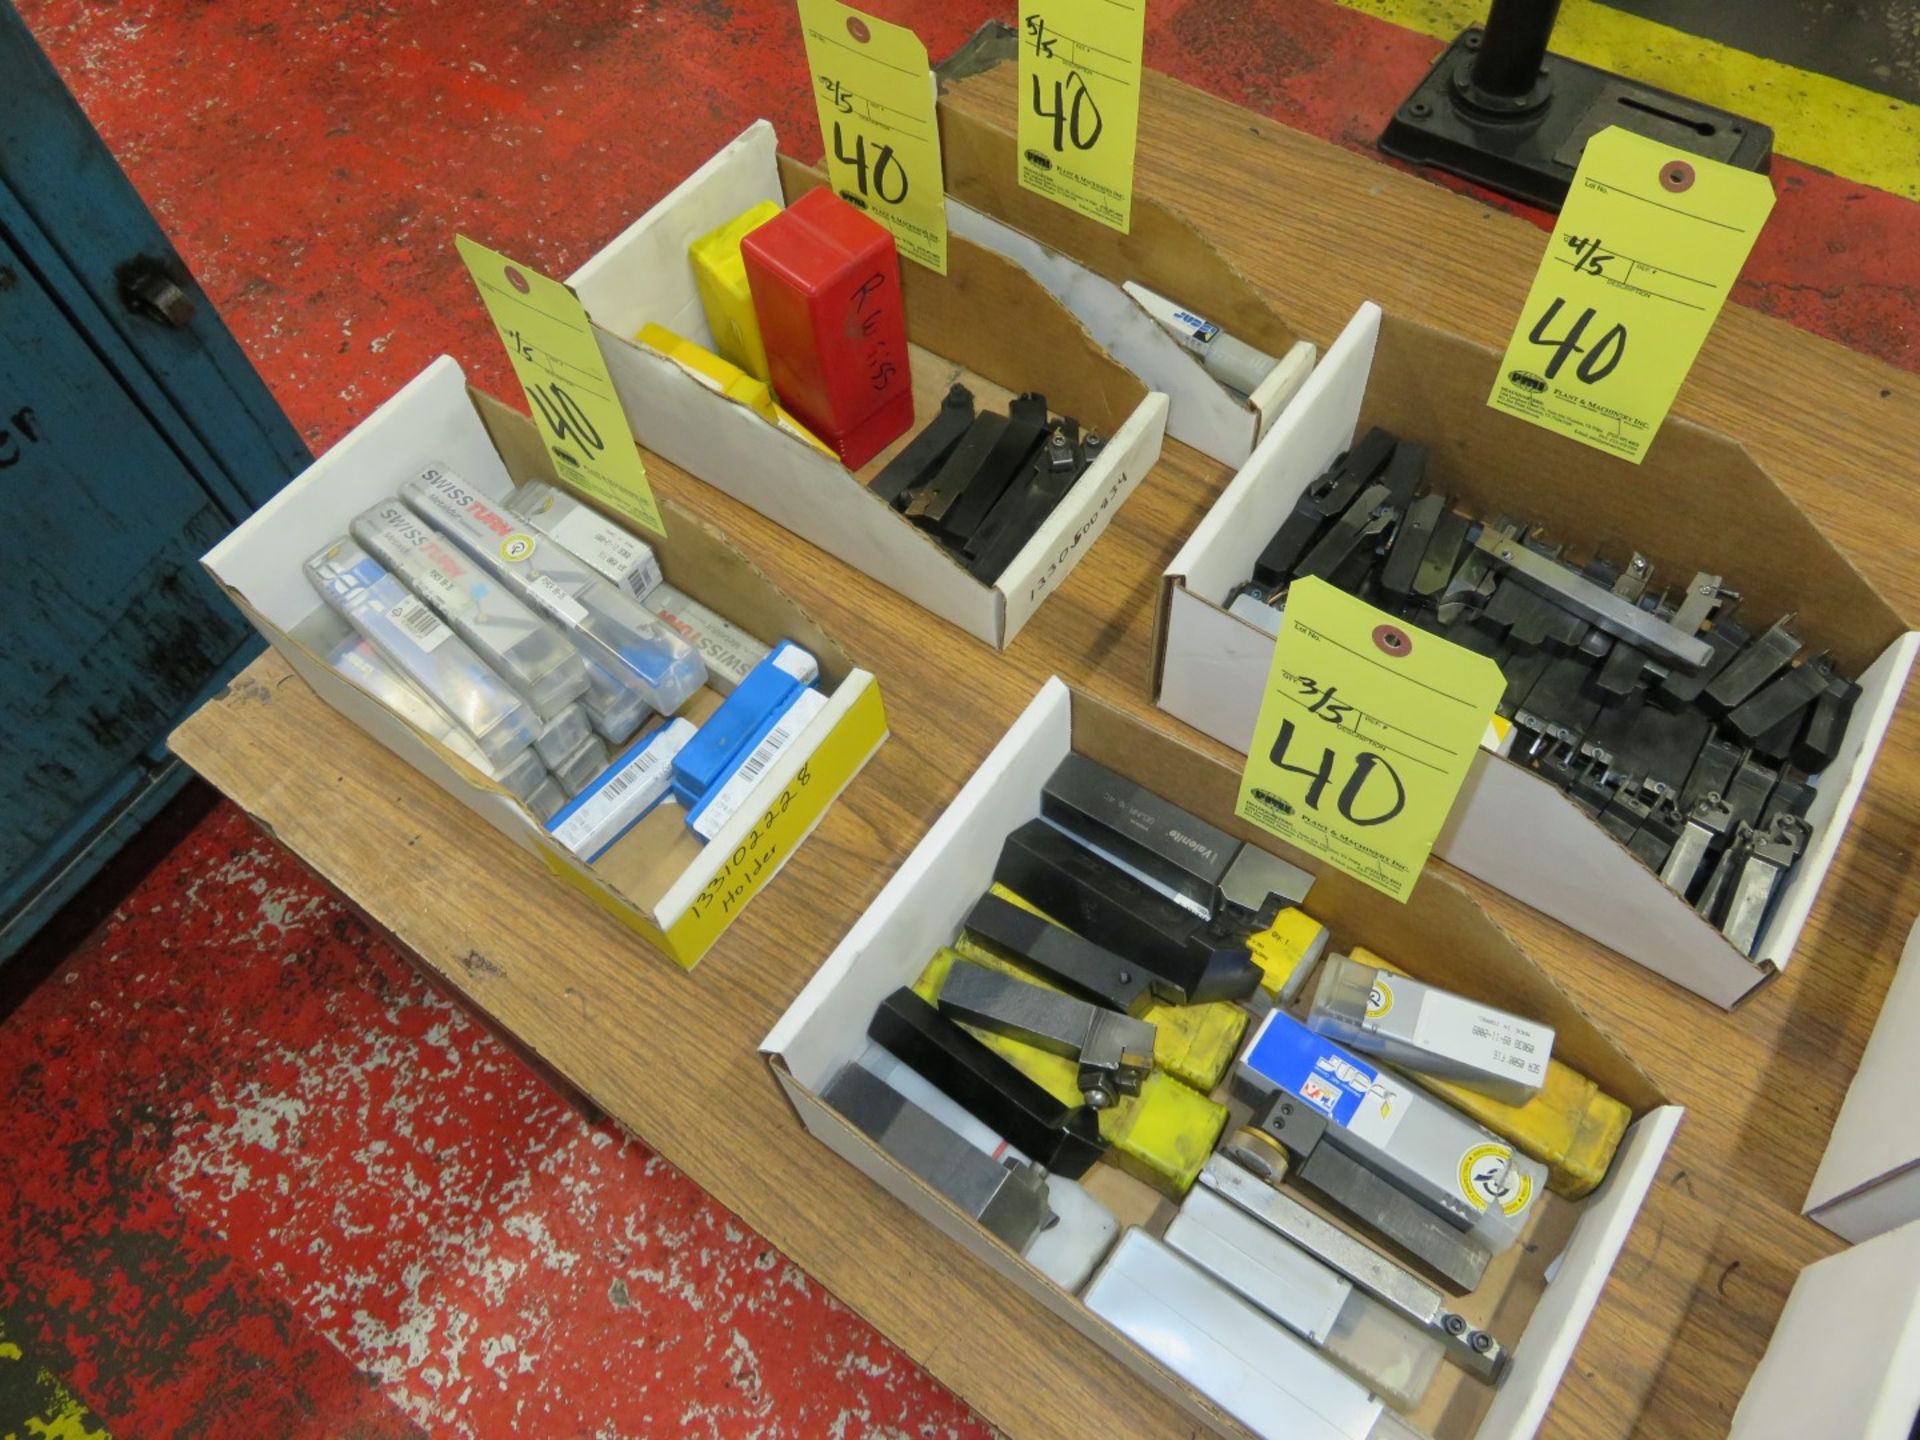 LOT CONSISTING OF, insert type tool holders, cut-off holders, knurling tool, (5) boxes, assorted